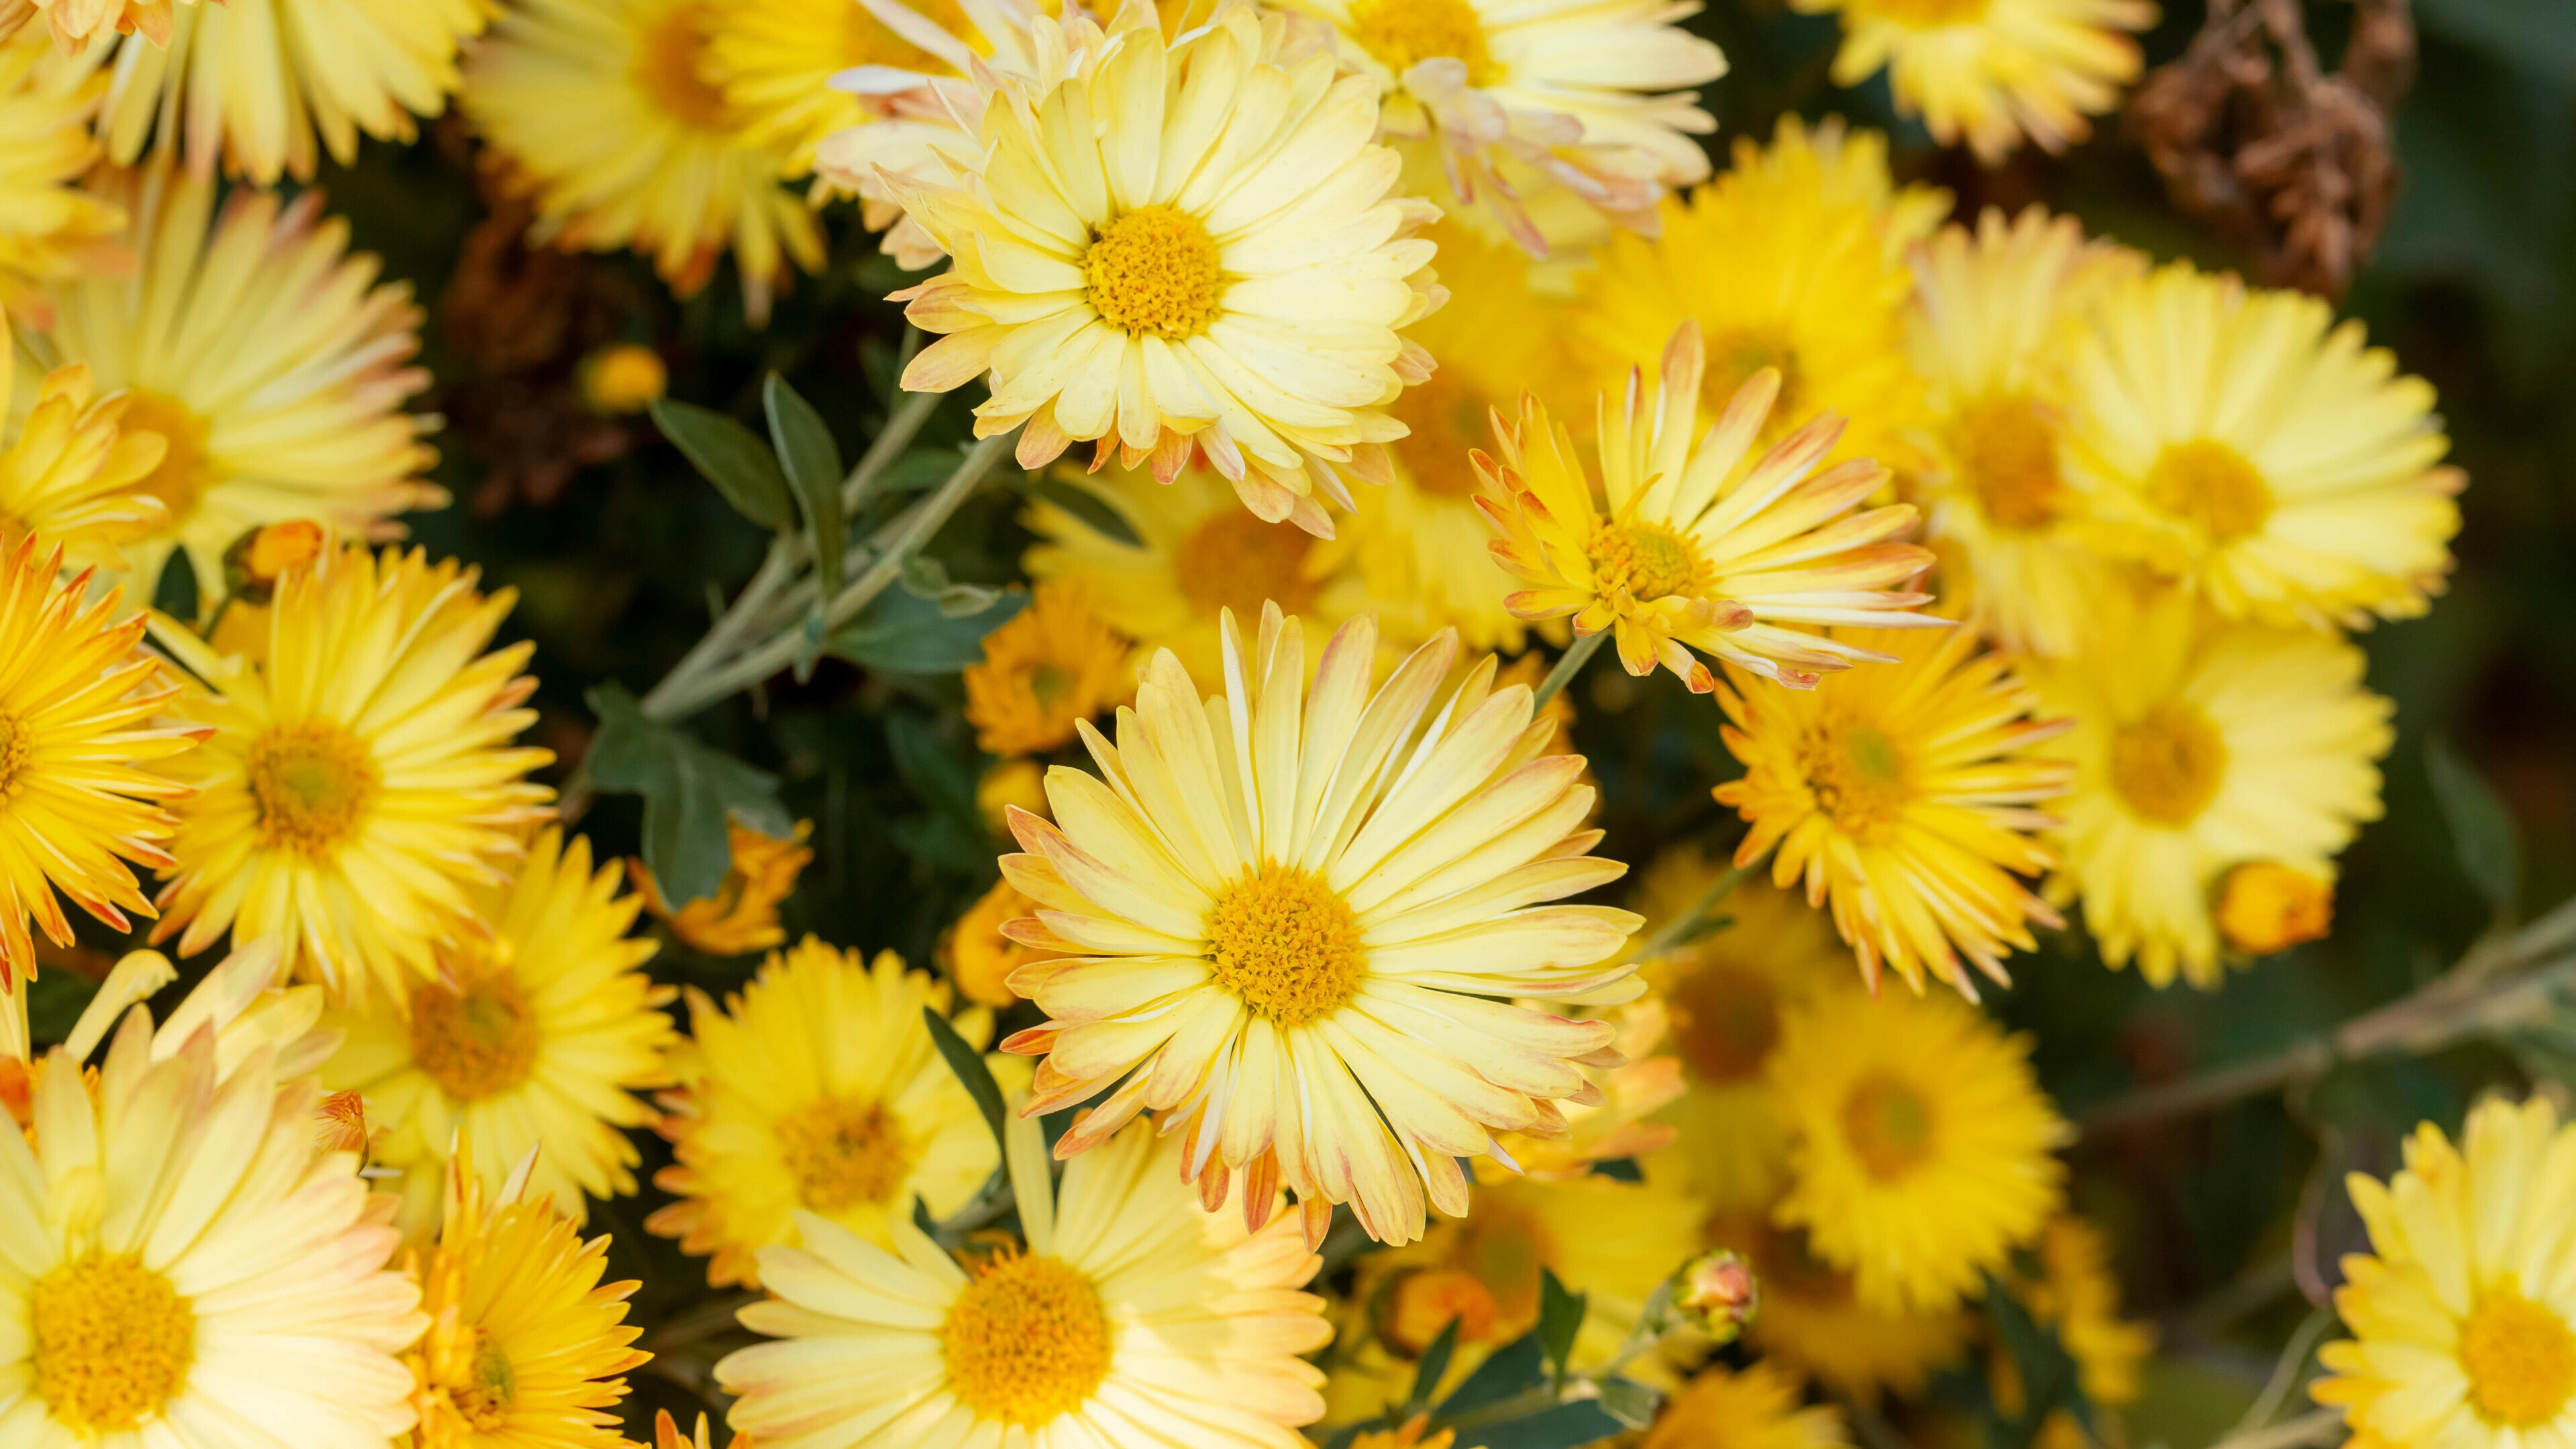 Chrysanthemum: They are native to East Asia and northeastern Europe, Petals. 3840x2160 4K Wallpaper.